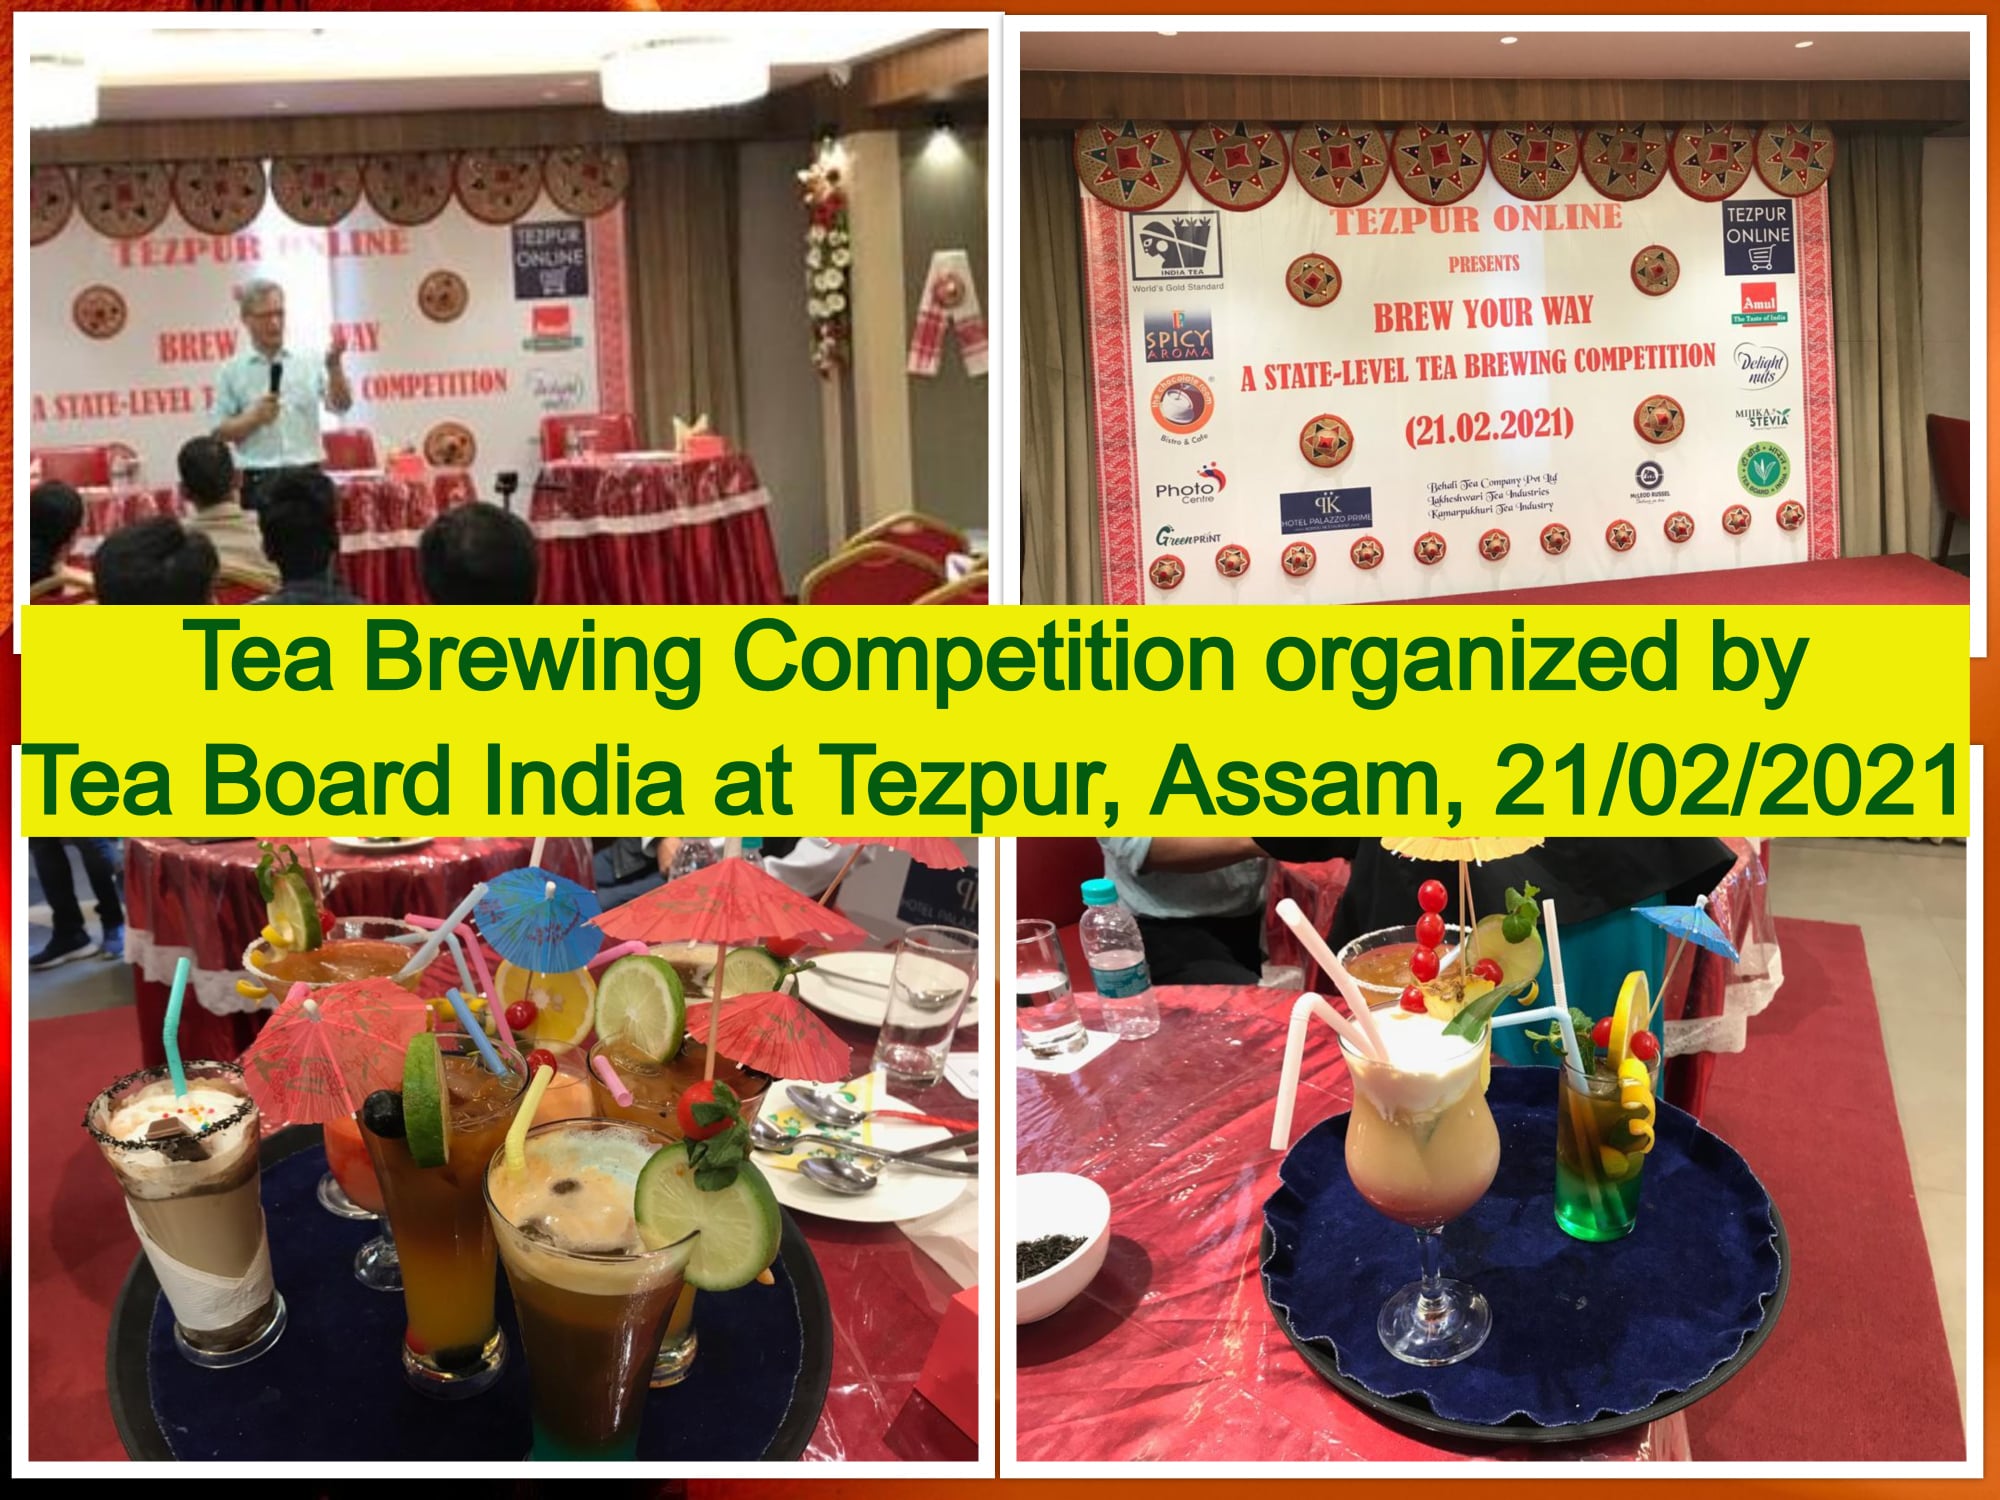 Tea Brewing Competition organized by Tea Board India at Tezpur, Assam, 21/02/2021